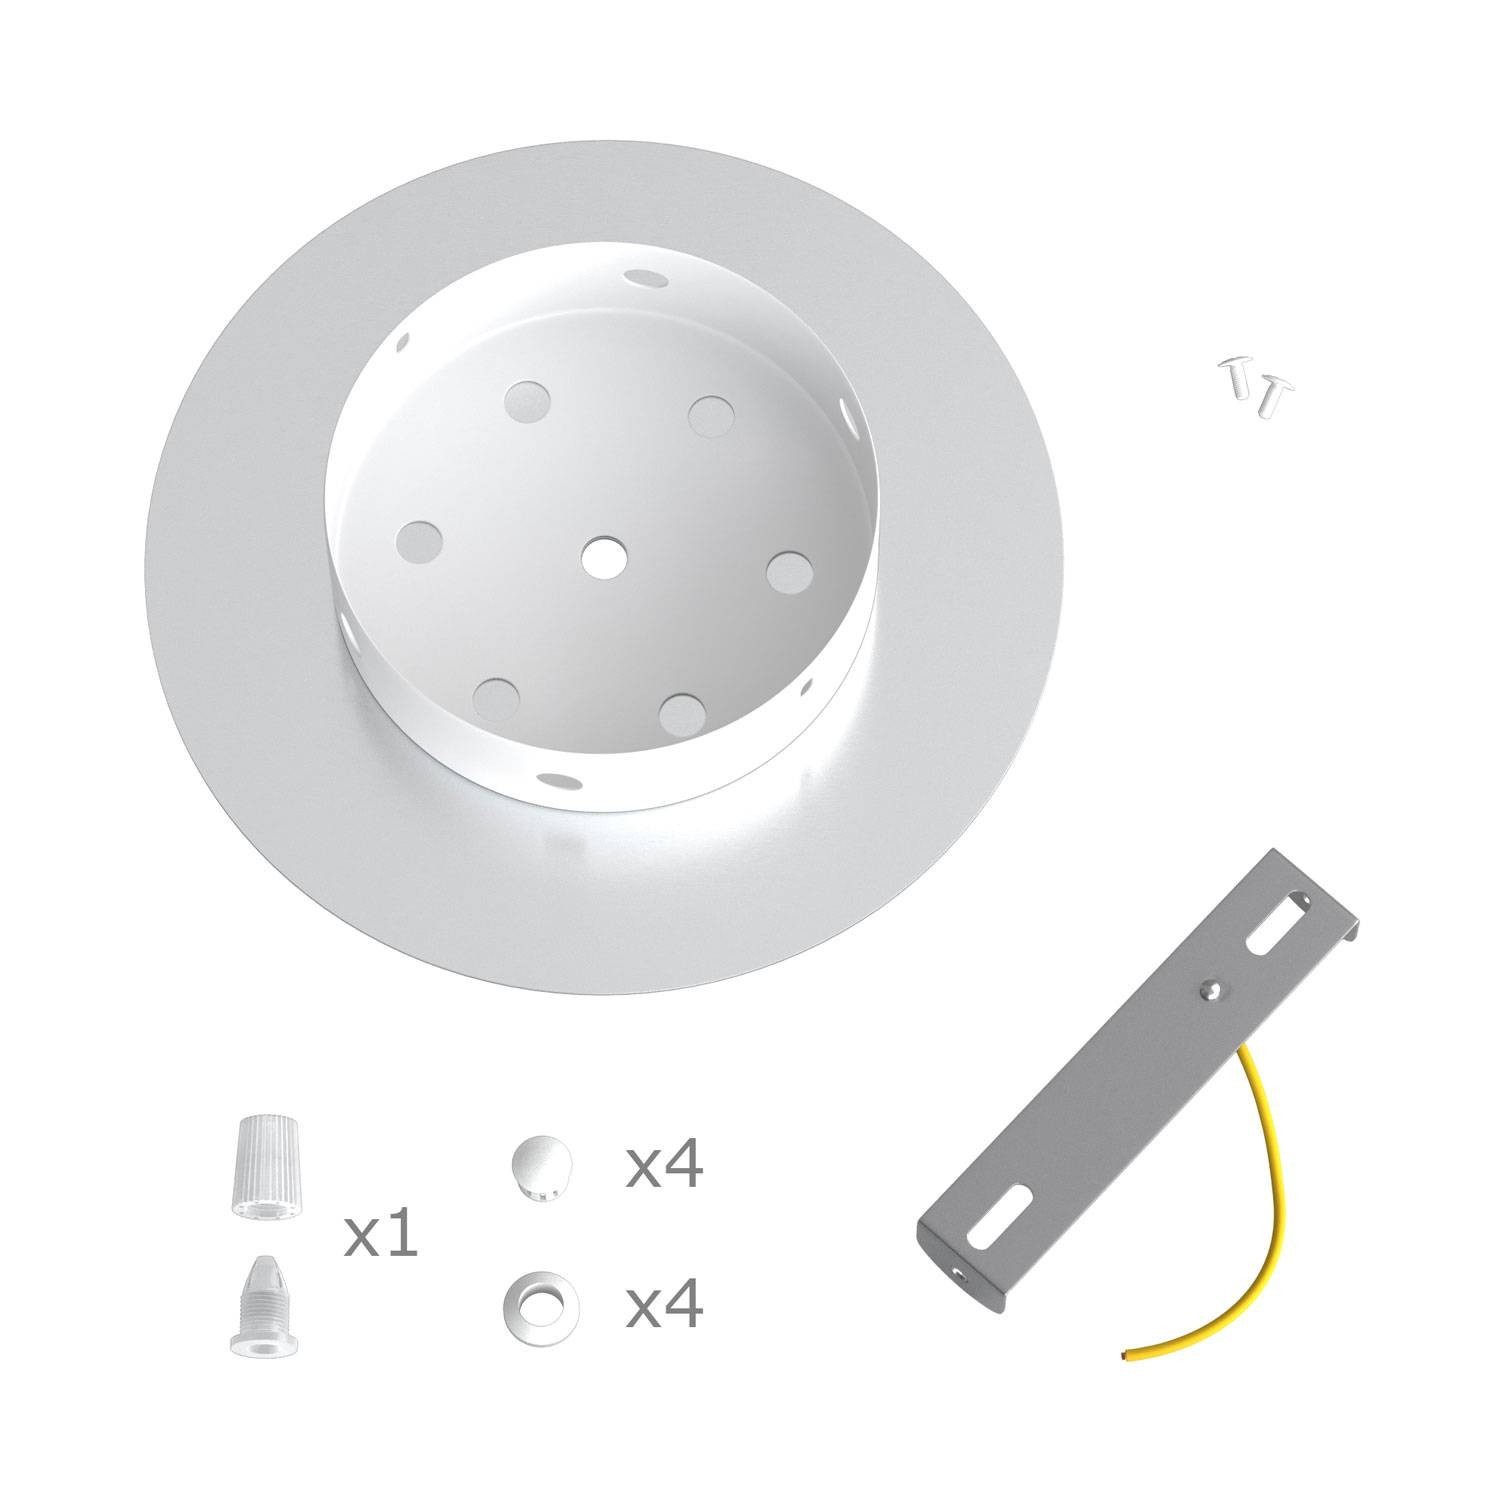 Round Rose-One 1-hole and 4 side holes ceiling rose kit, 200 mm - PROMO